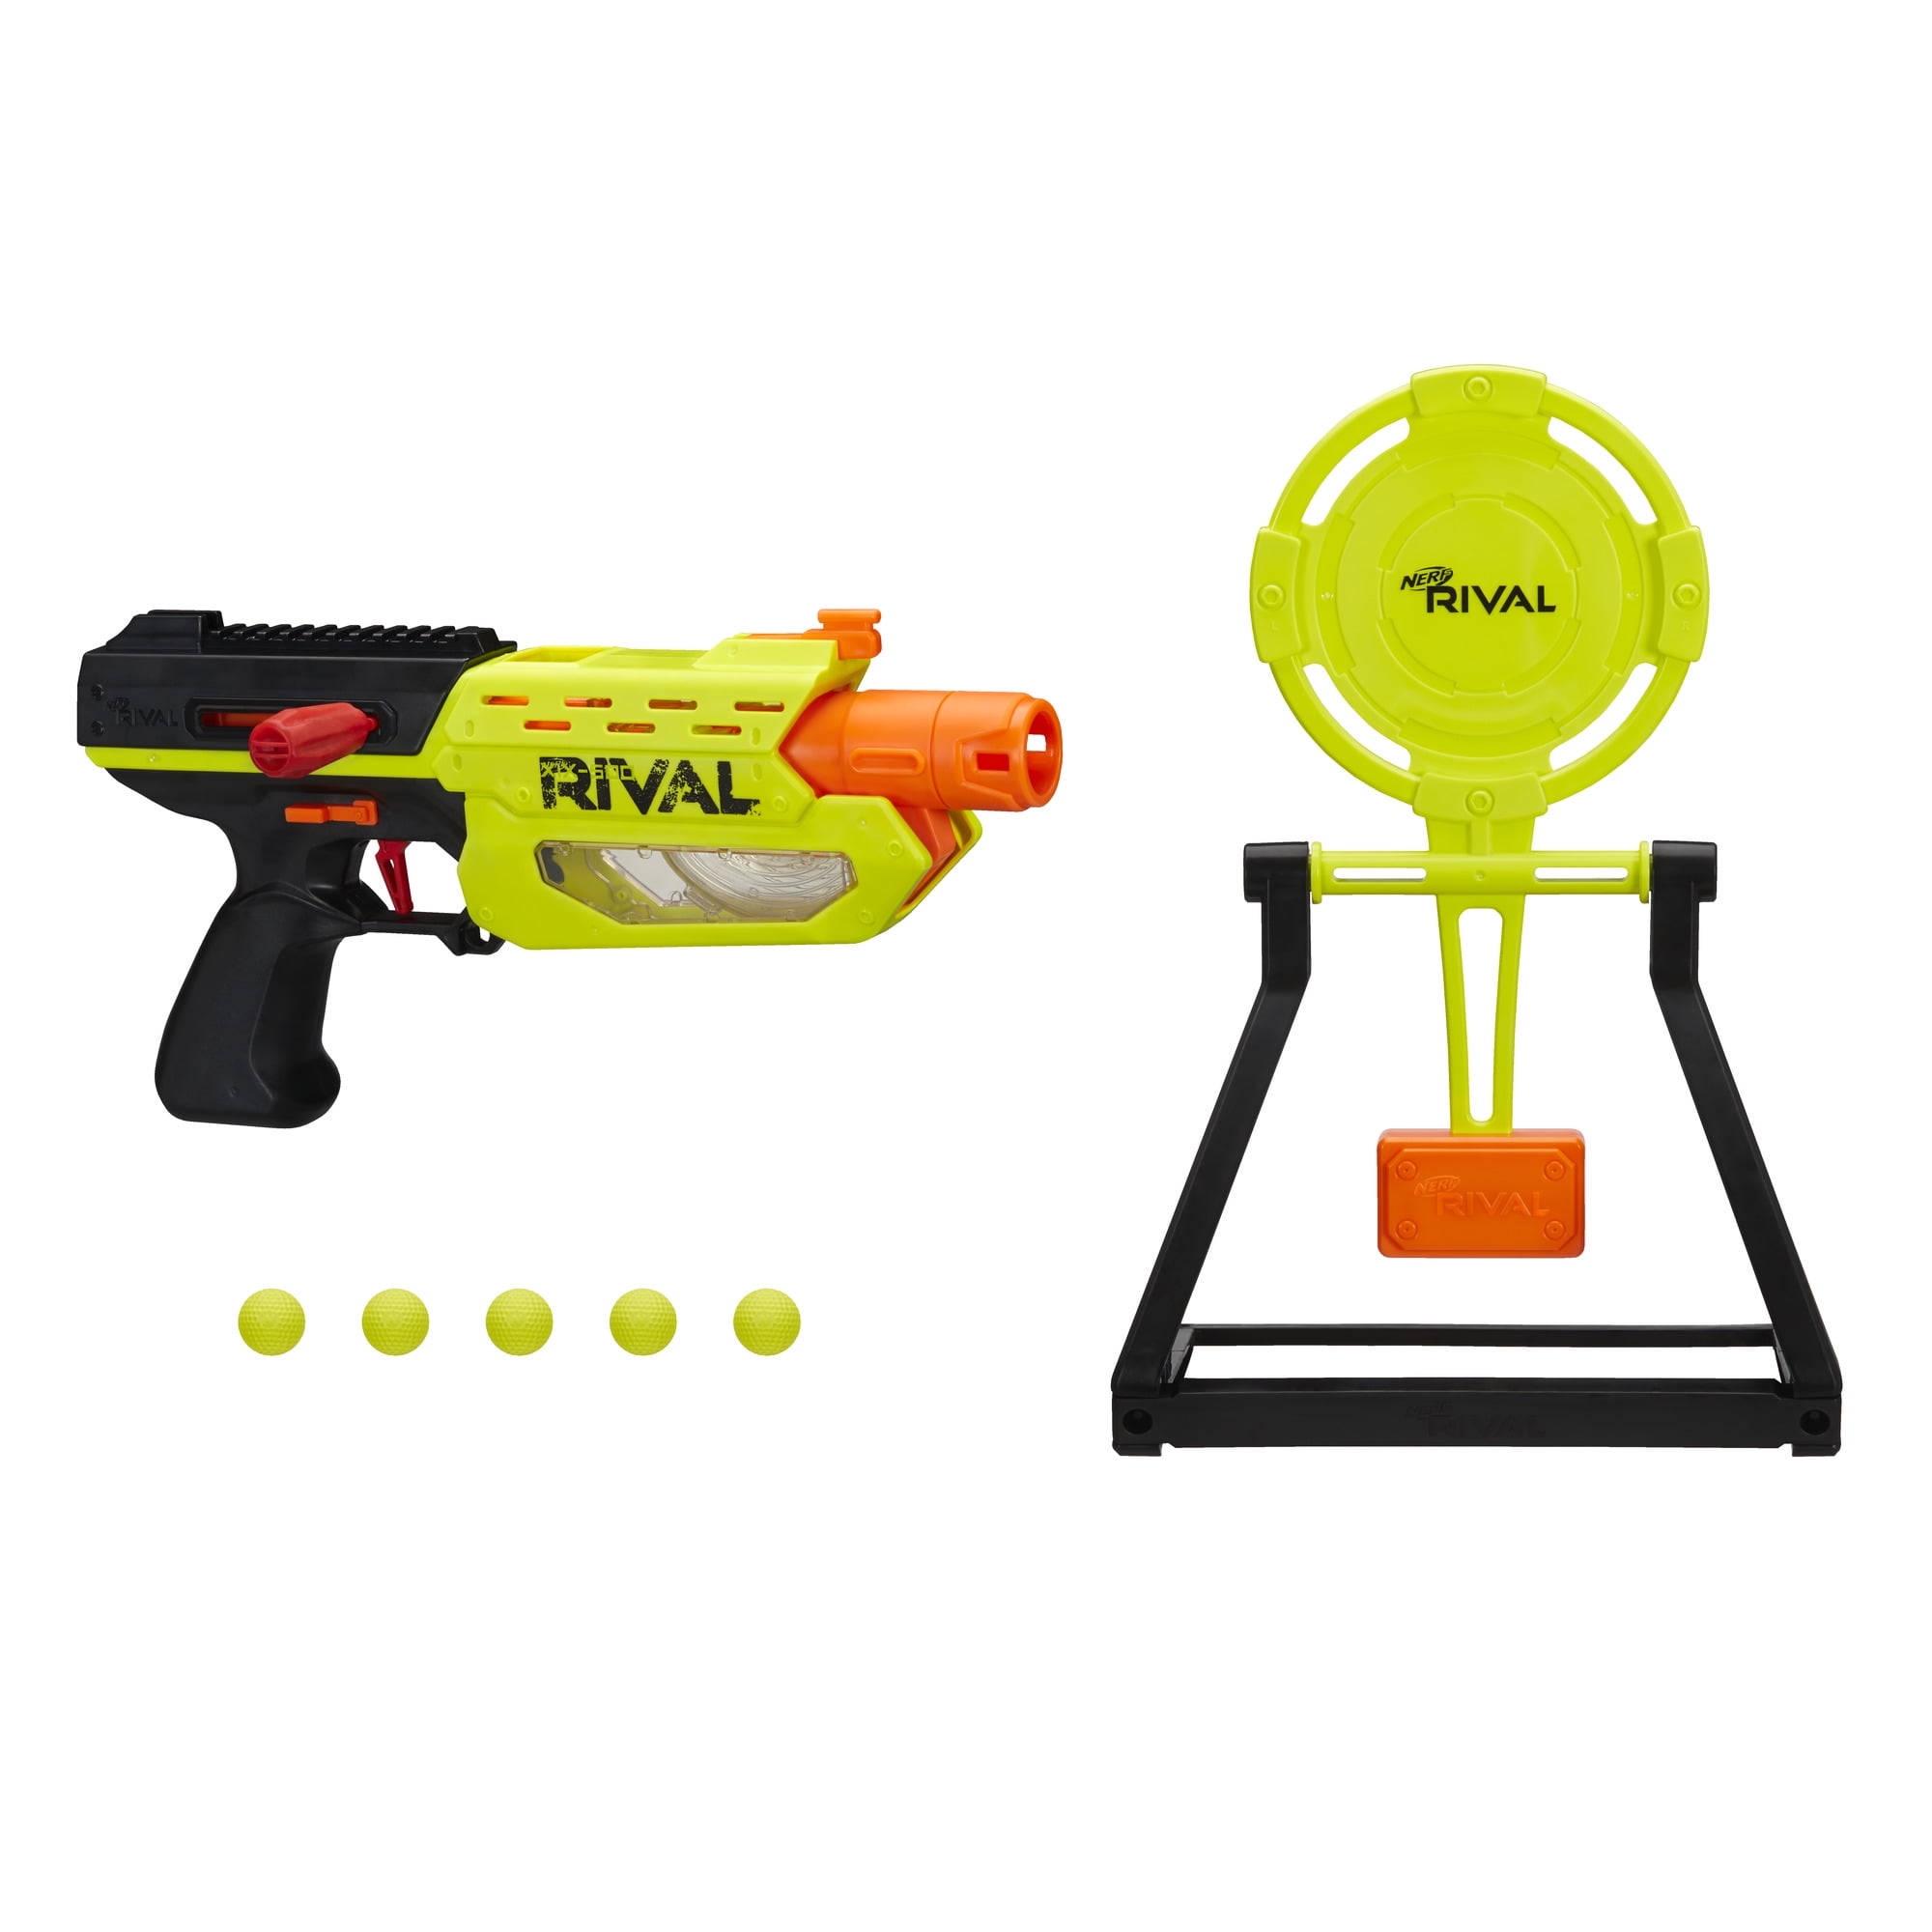 NERF Rival 60 Round Refill Blaster Ages 14 Toy Zombie Fight Play Fire Gun Gift 